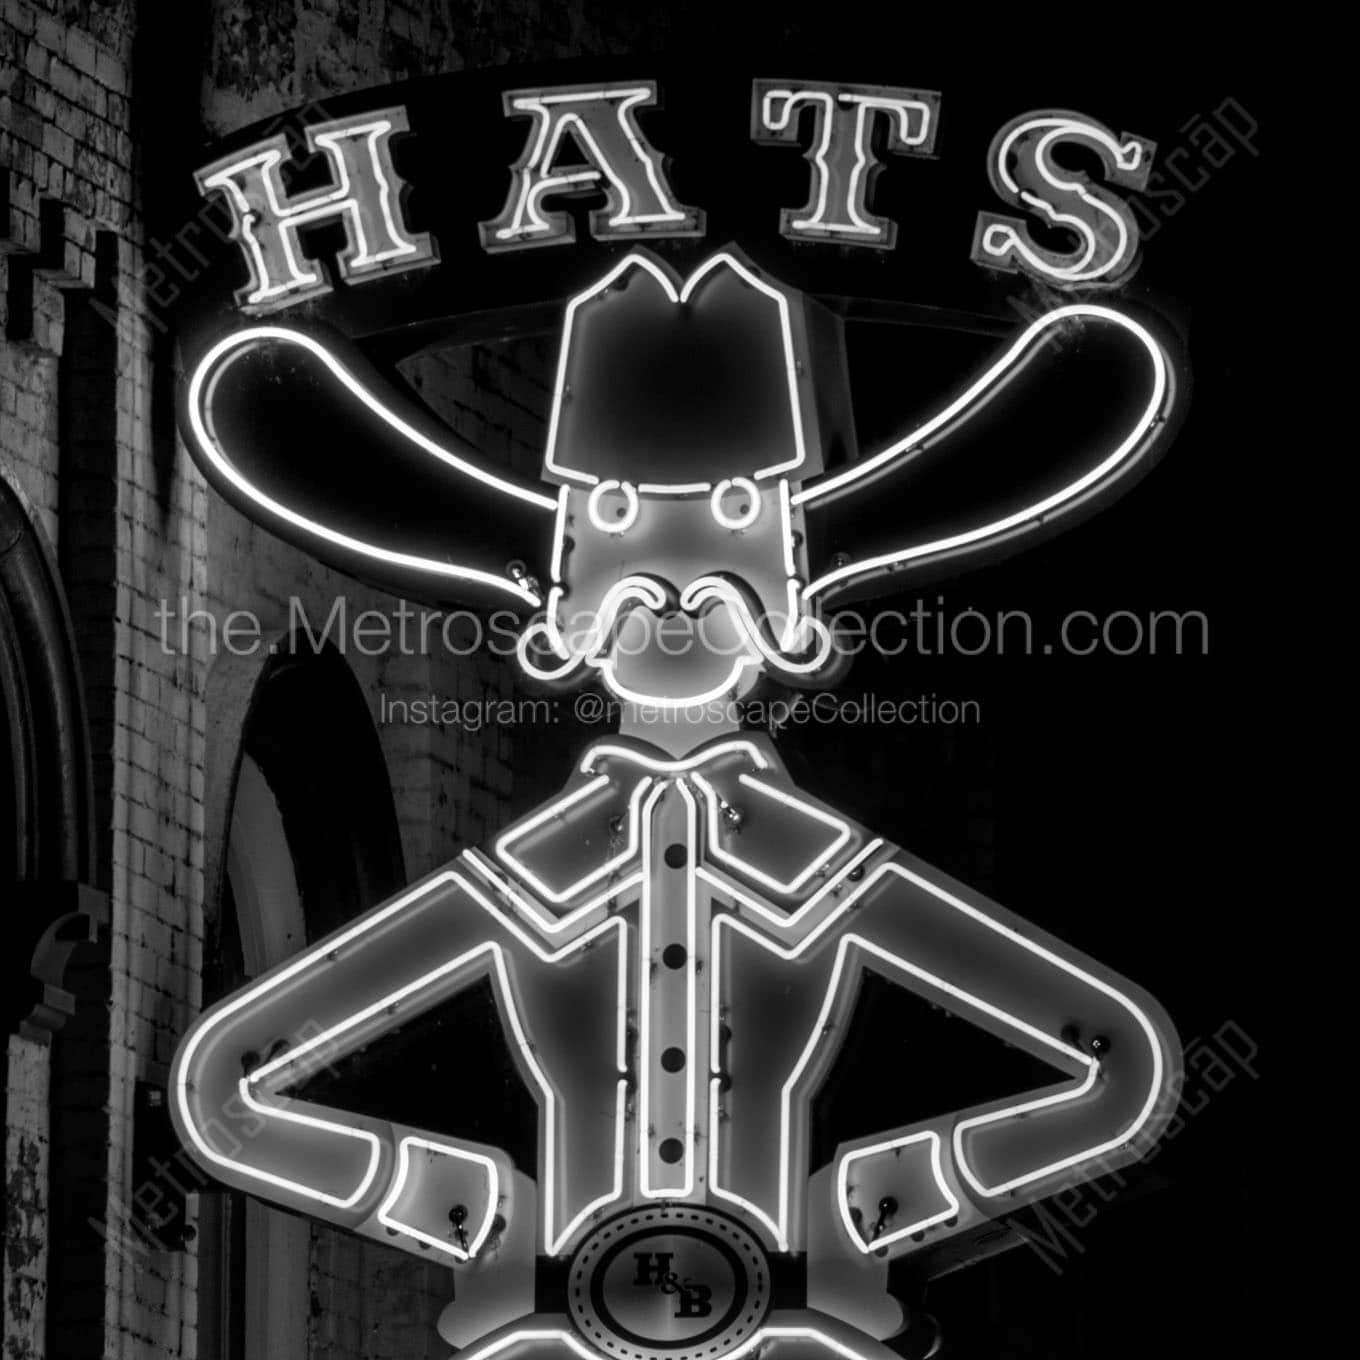 hat and boots neon sign Black & White Office Art